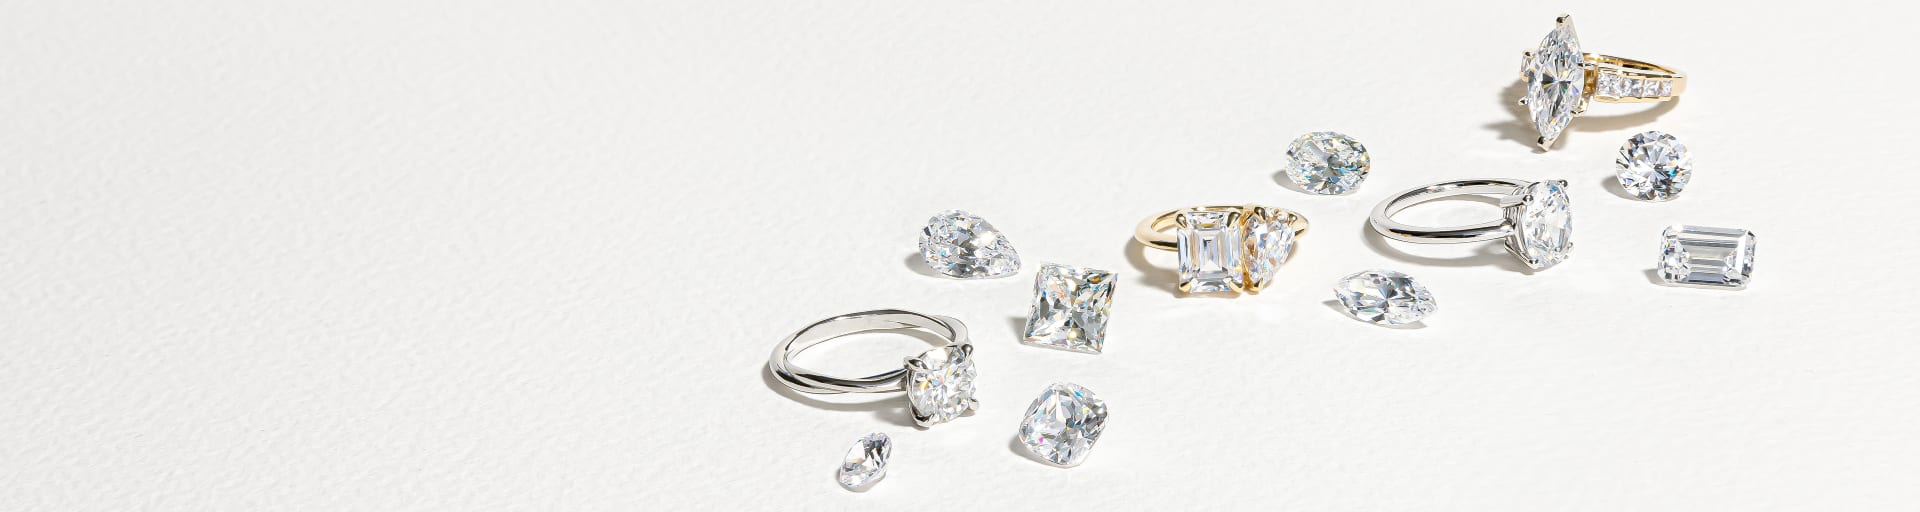 How to Give a Promise Ring that Pops (Without Popping the Question)